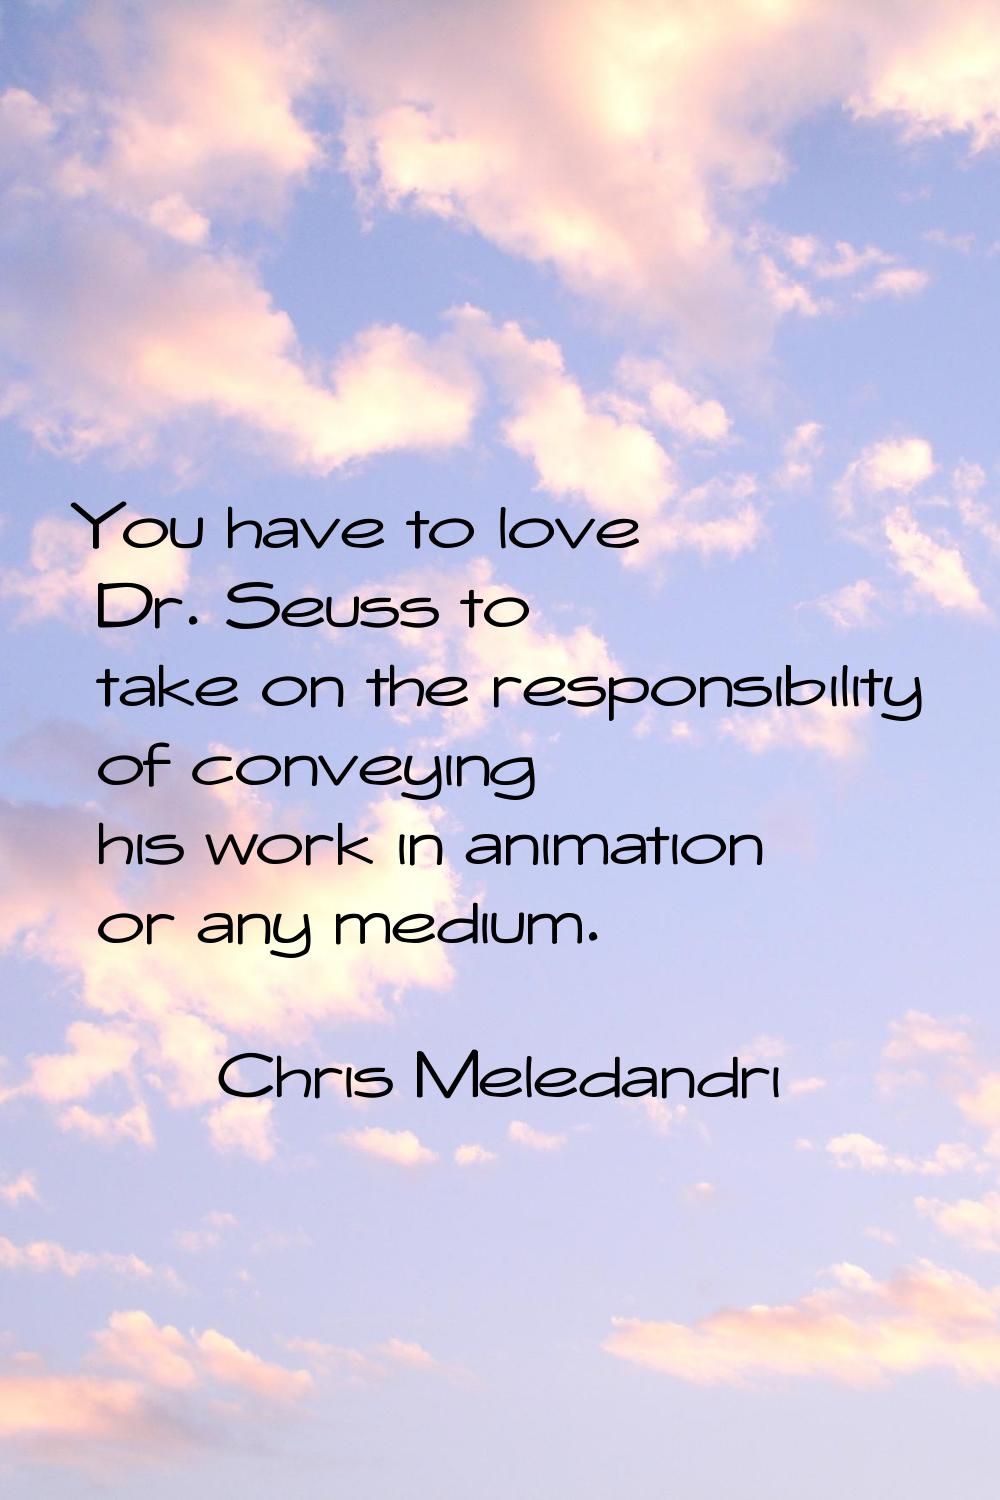 You have to love Dr. Seuss to take on the responsibility of conveying his work in animation or any 